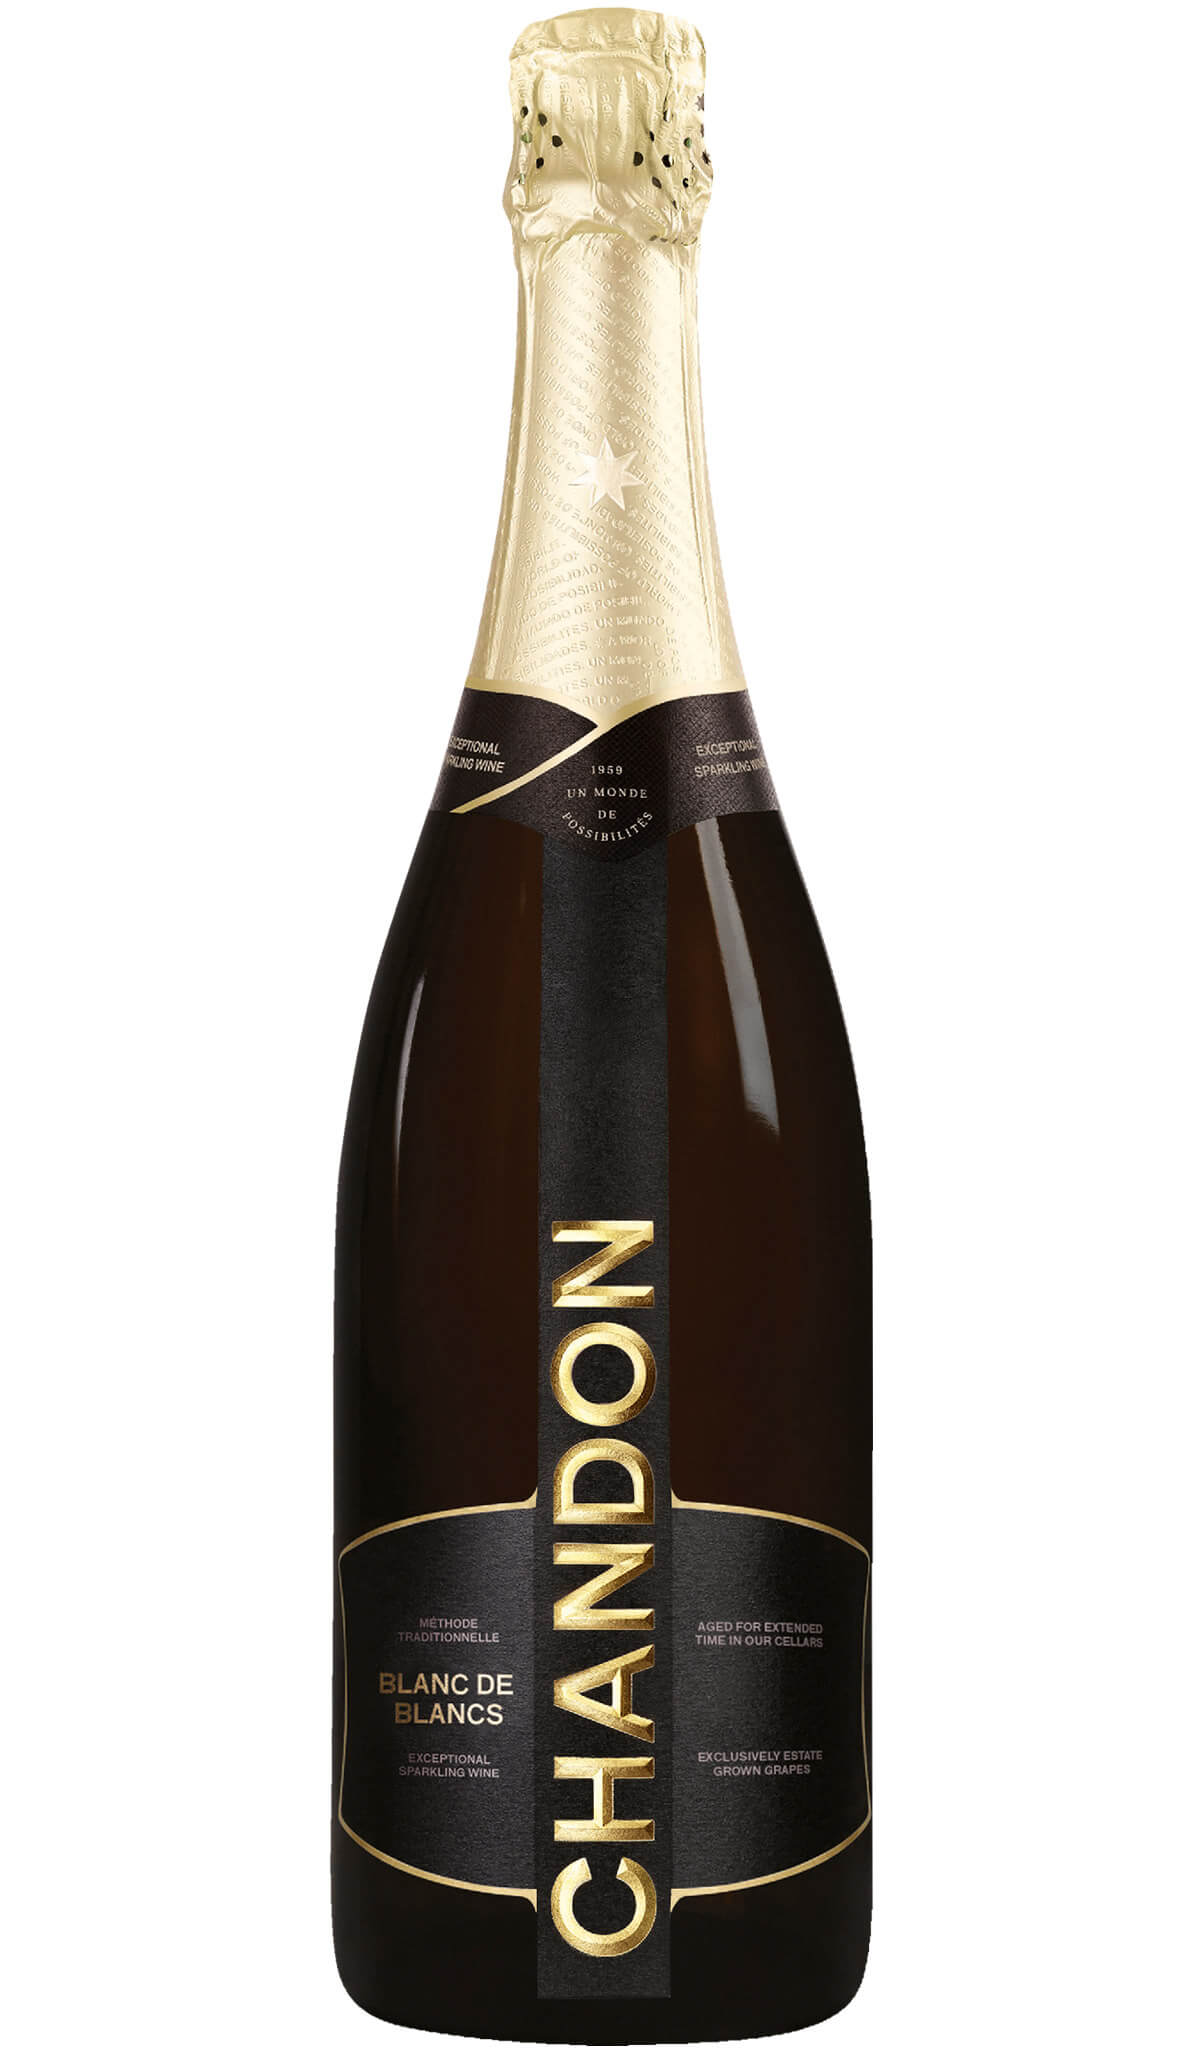 Find out more or purchase Chandon Vintage Blanc De Blancs 2017 online at Wine Sellers Direct - Australia's independent liquor specialists.